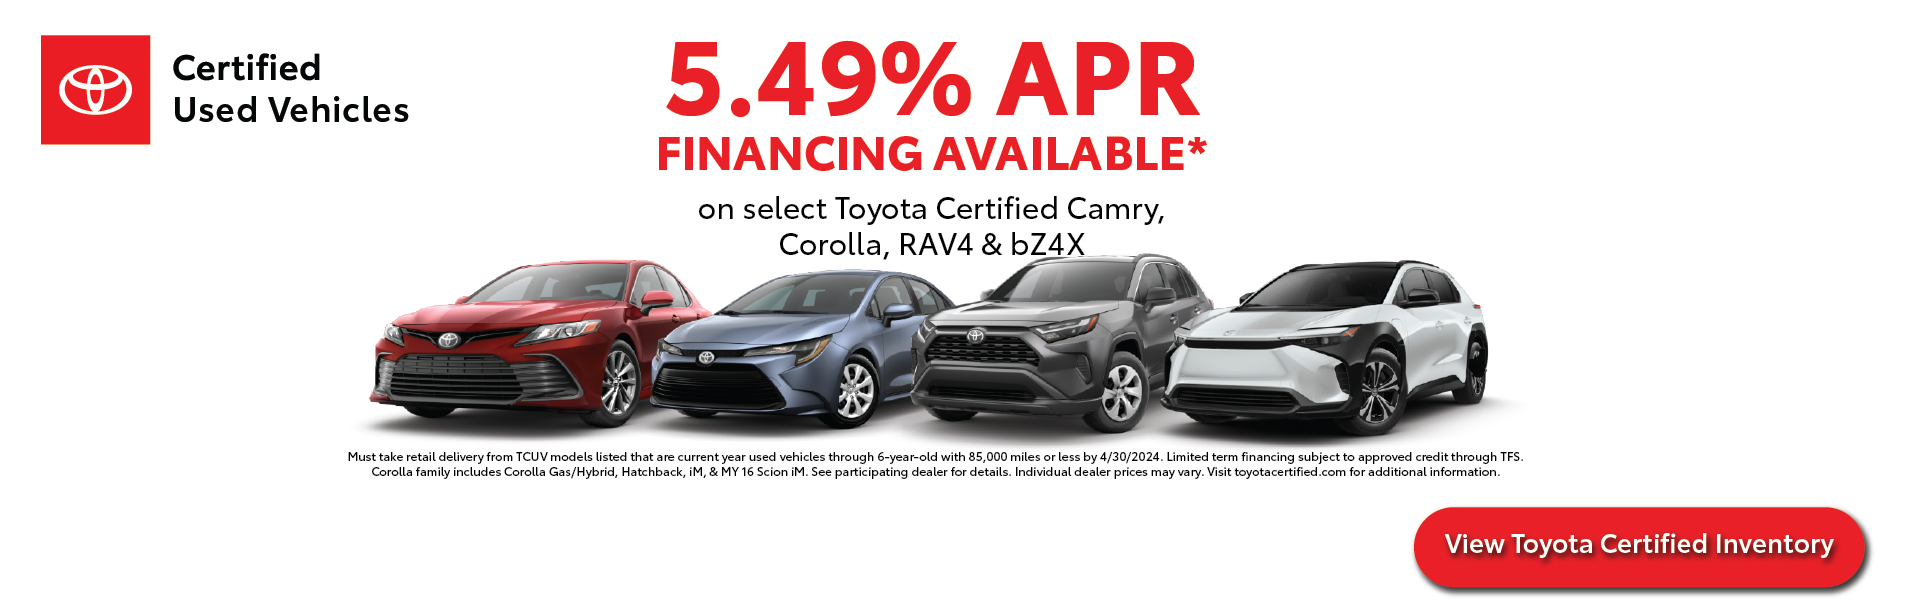 Toyota Certified Used Vehicle Offer | Continental Toyota in Hodgkins IL